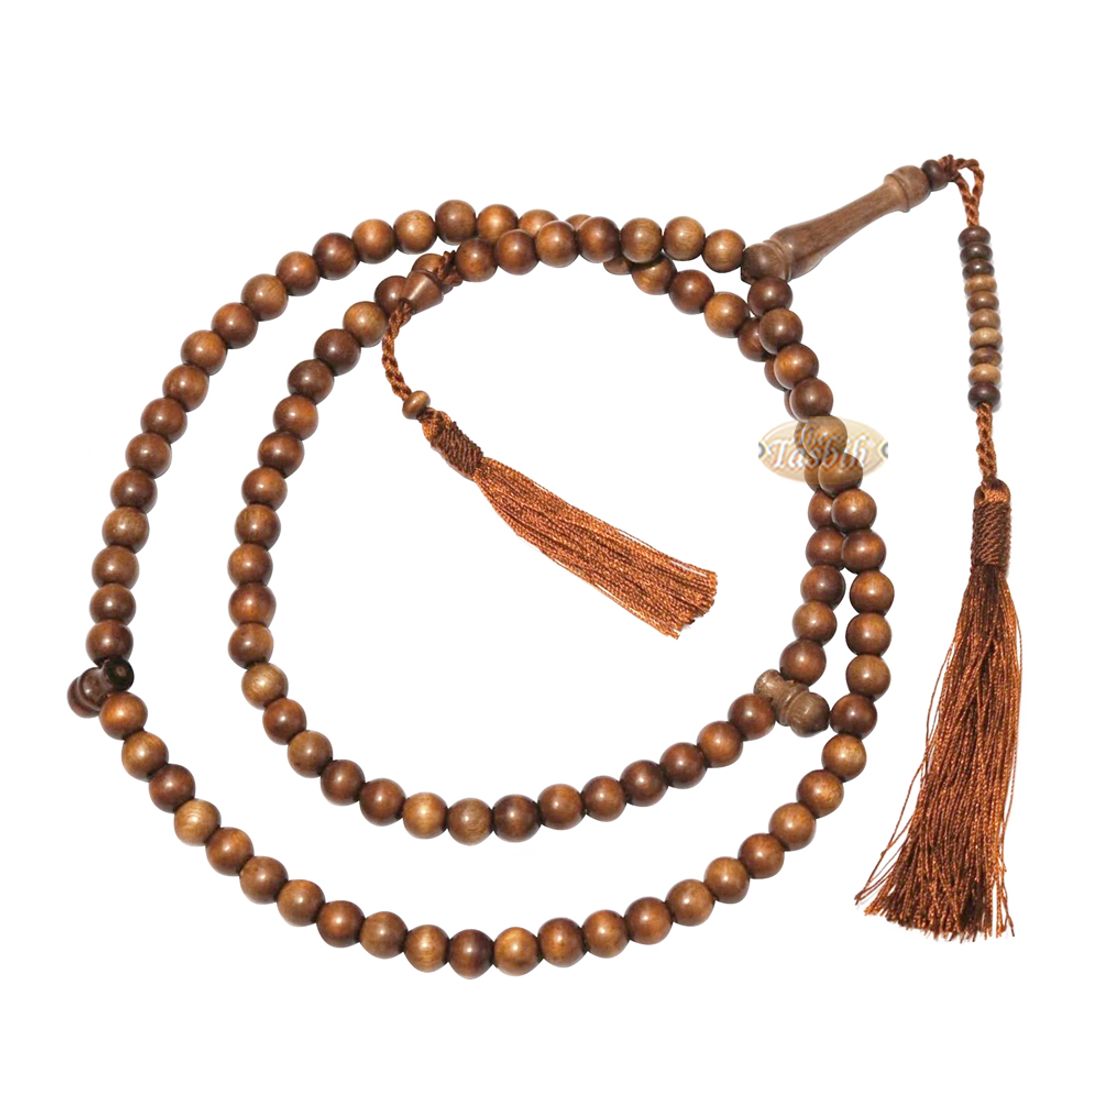 Naturally-Dyed Ironwood 8mm Tasbih Prayer Beads 99-Bead with Matching Brown Tassels